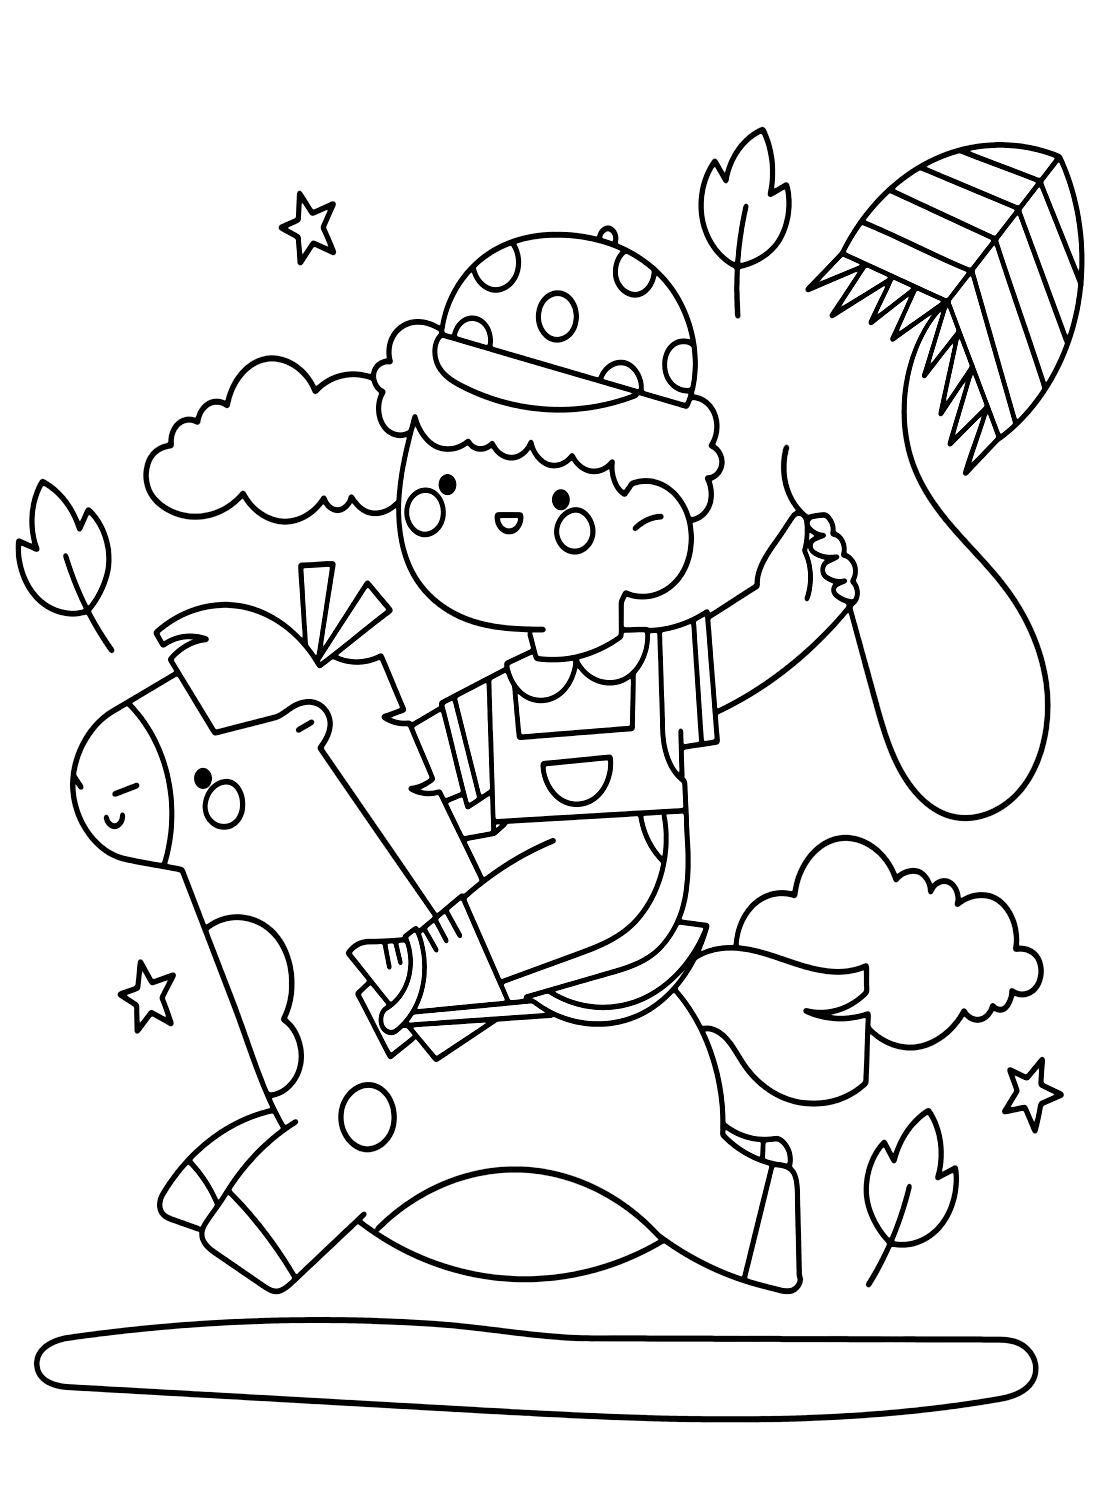 Fly a Kite on Vacation Coloring Pages